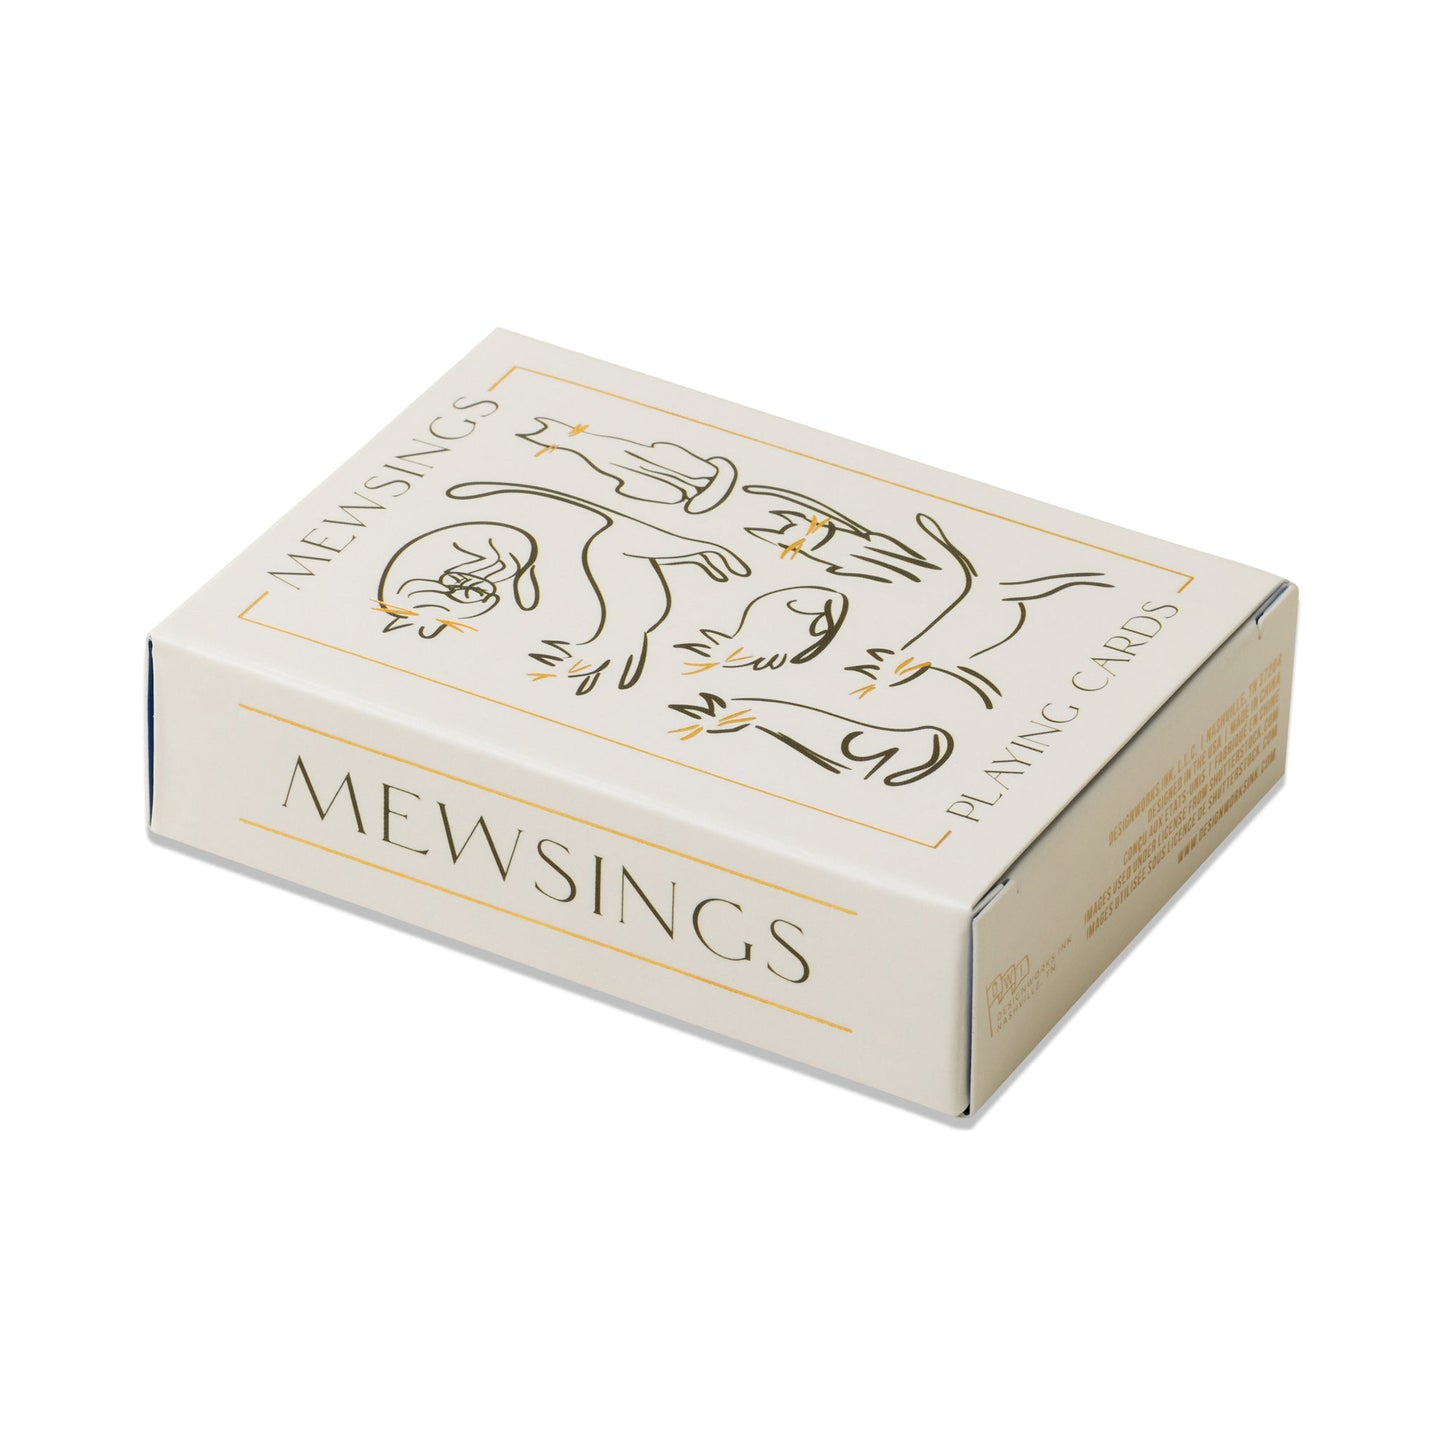 Playing Cards - Cats - side view box with cats on it